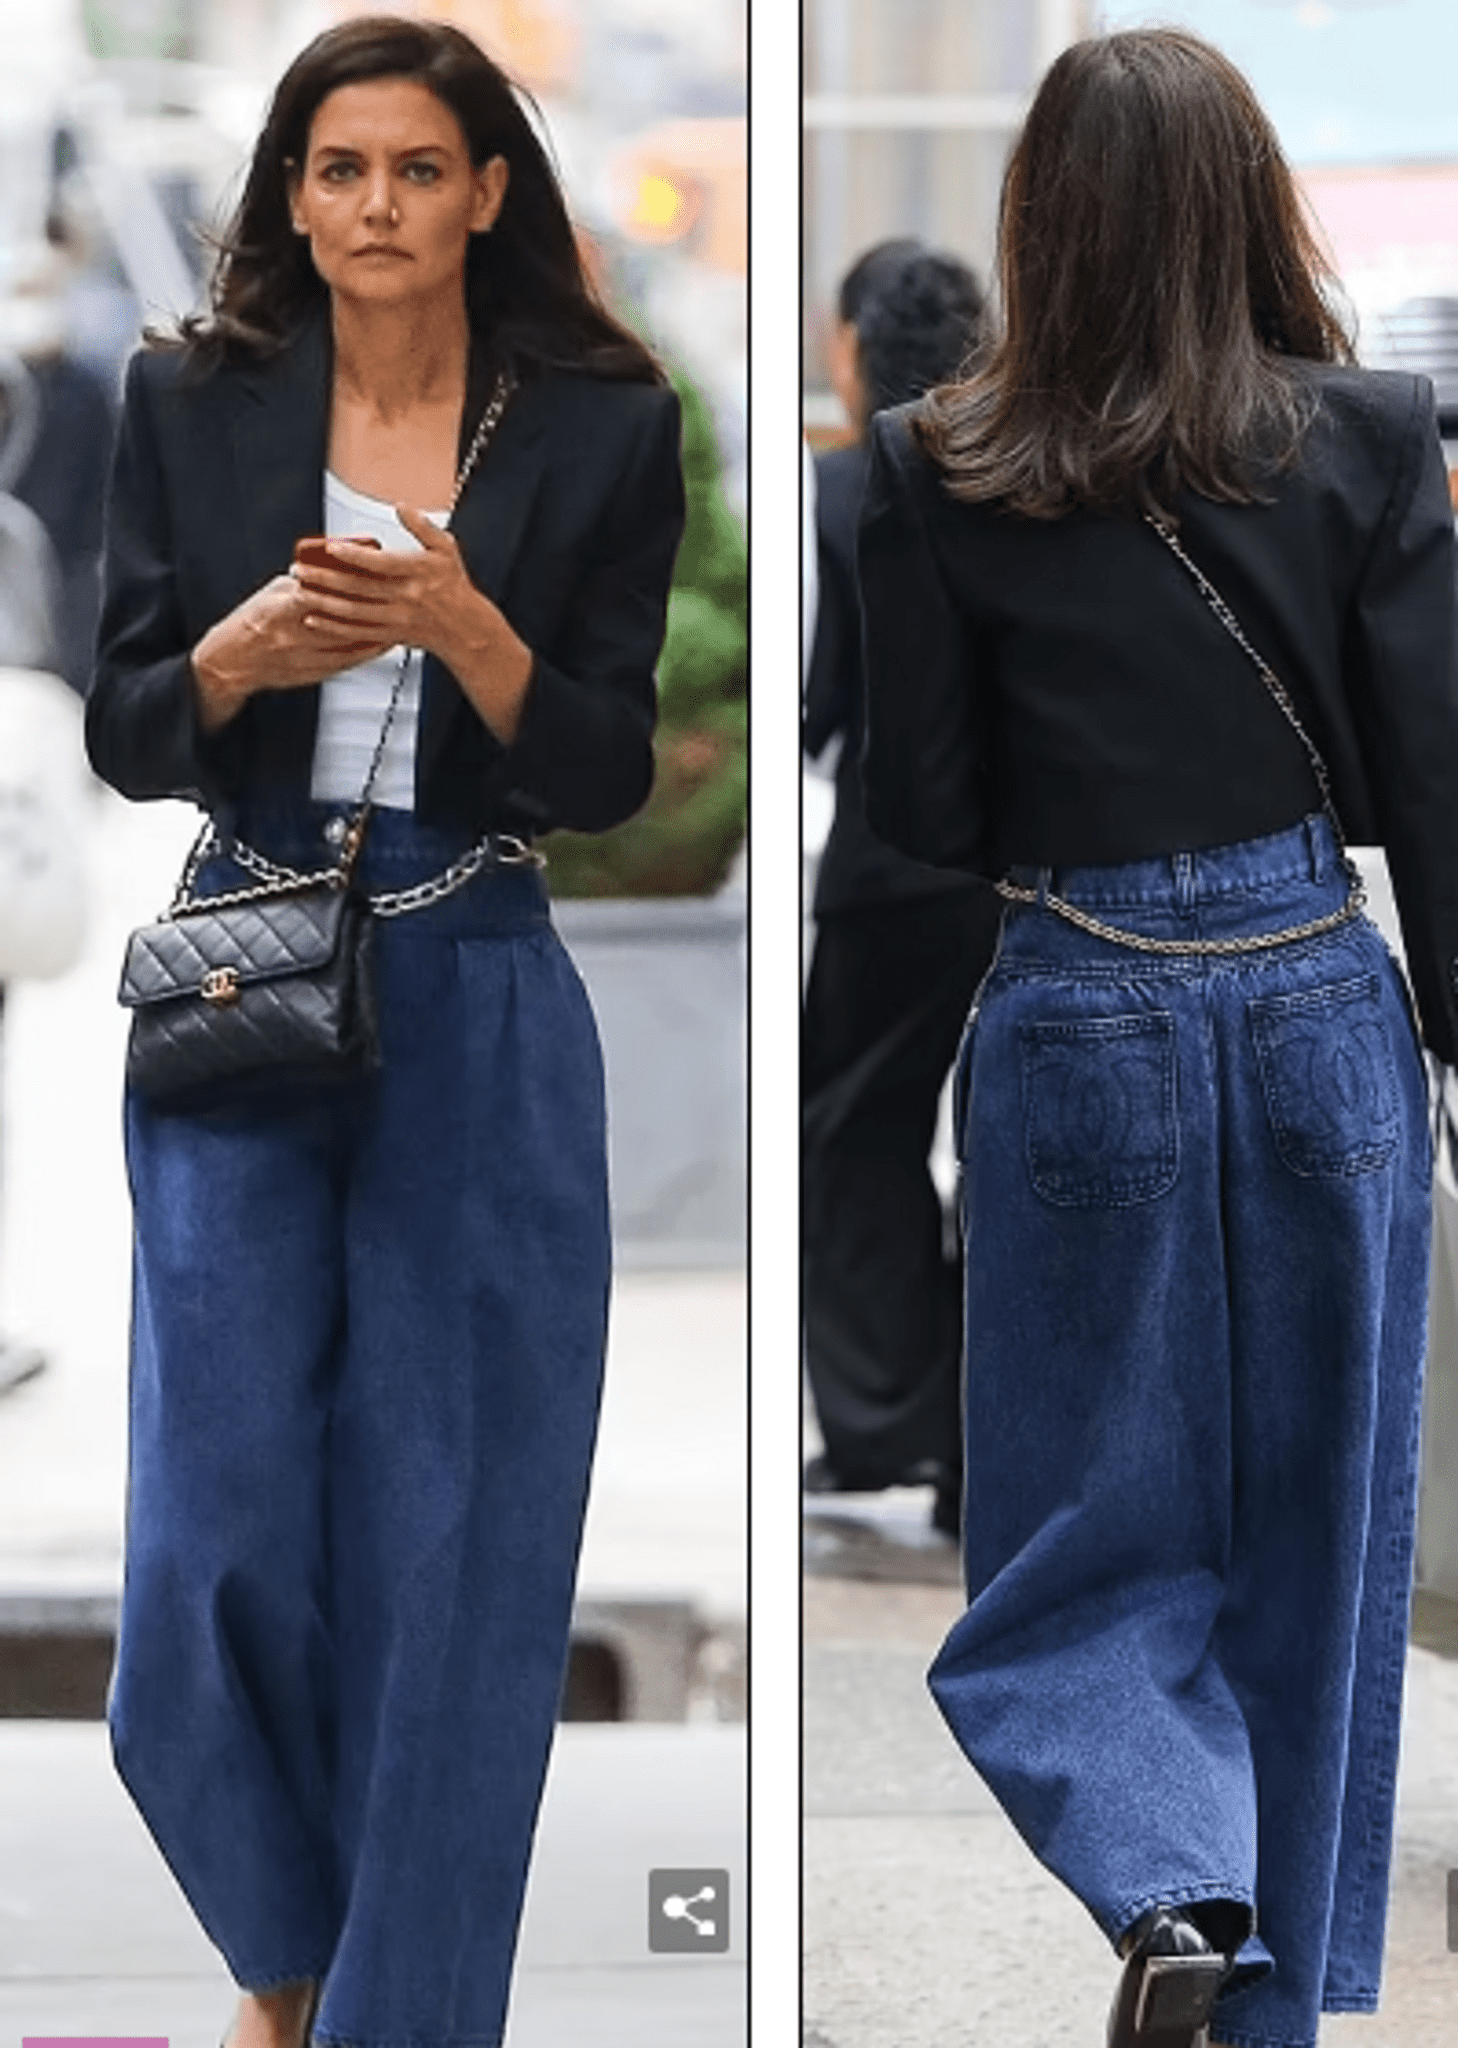 katie-holmes-on-walk-in-dream-jeans-that-will-fit-into-any-wardrobe